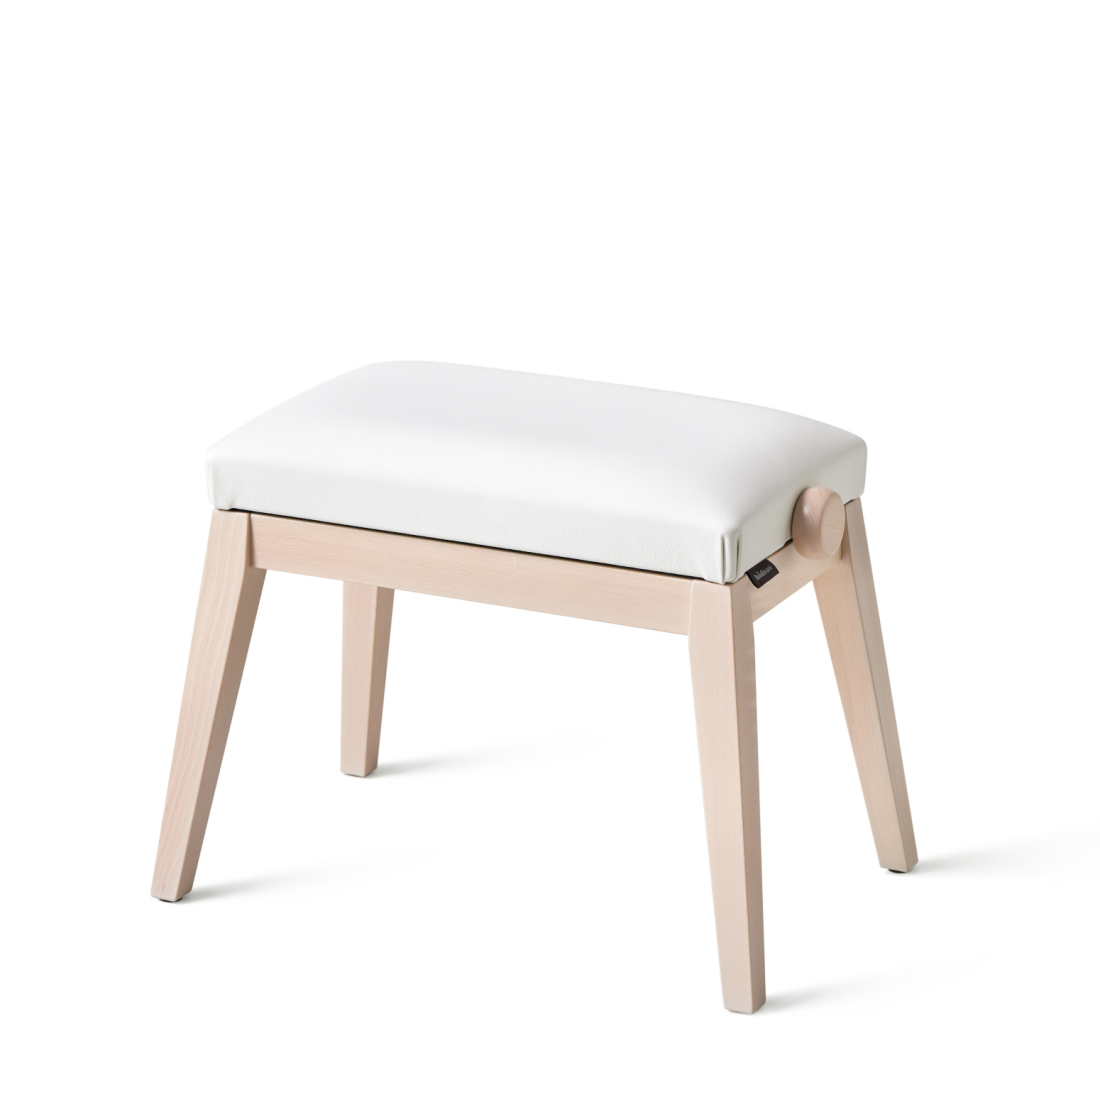 Ash Adjustable Height Piano Bench - White Leatherette